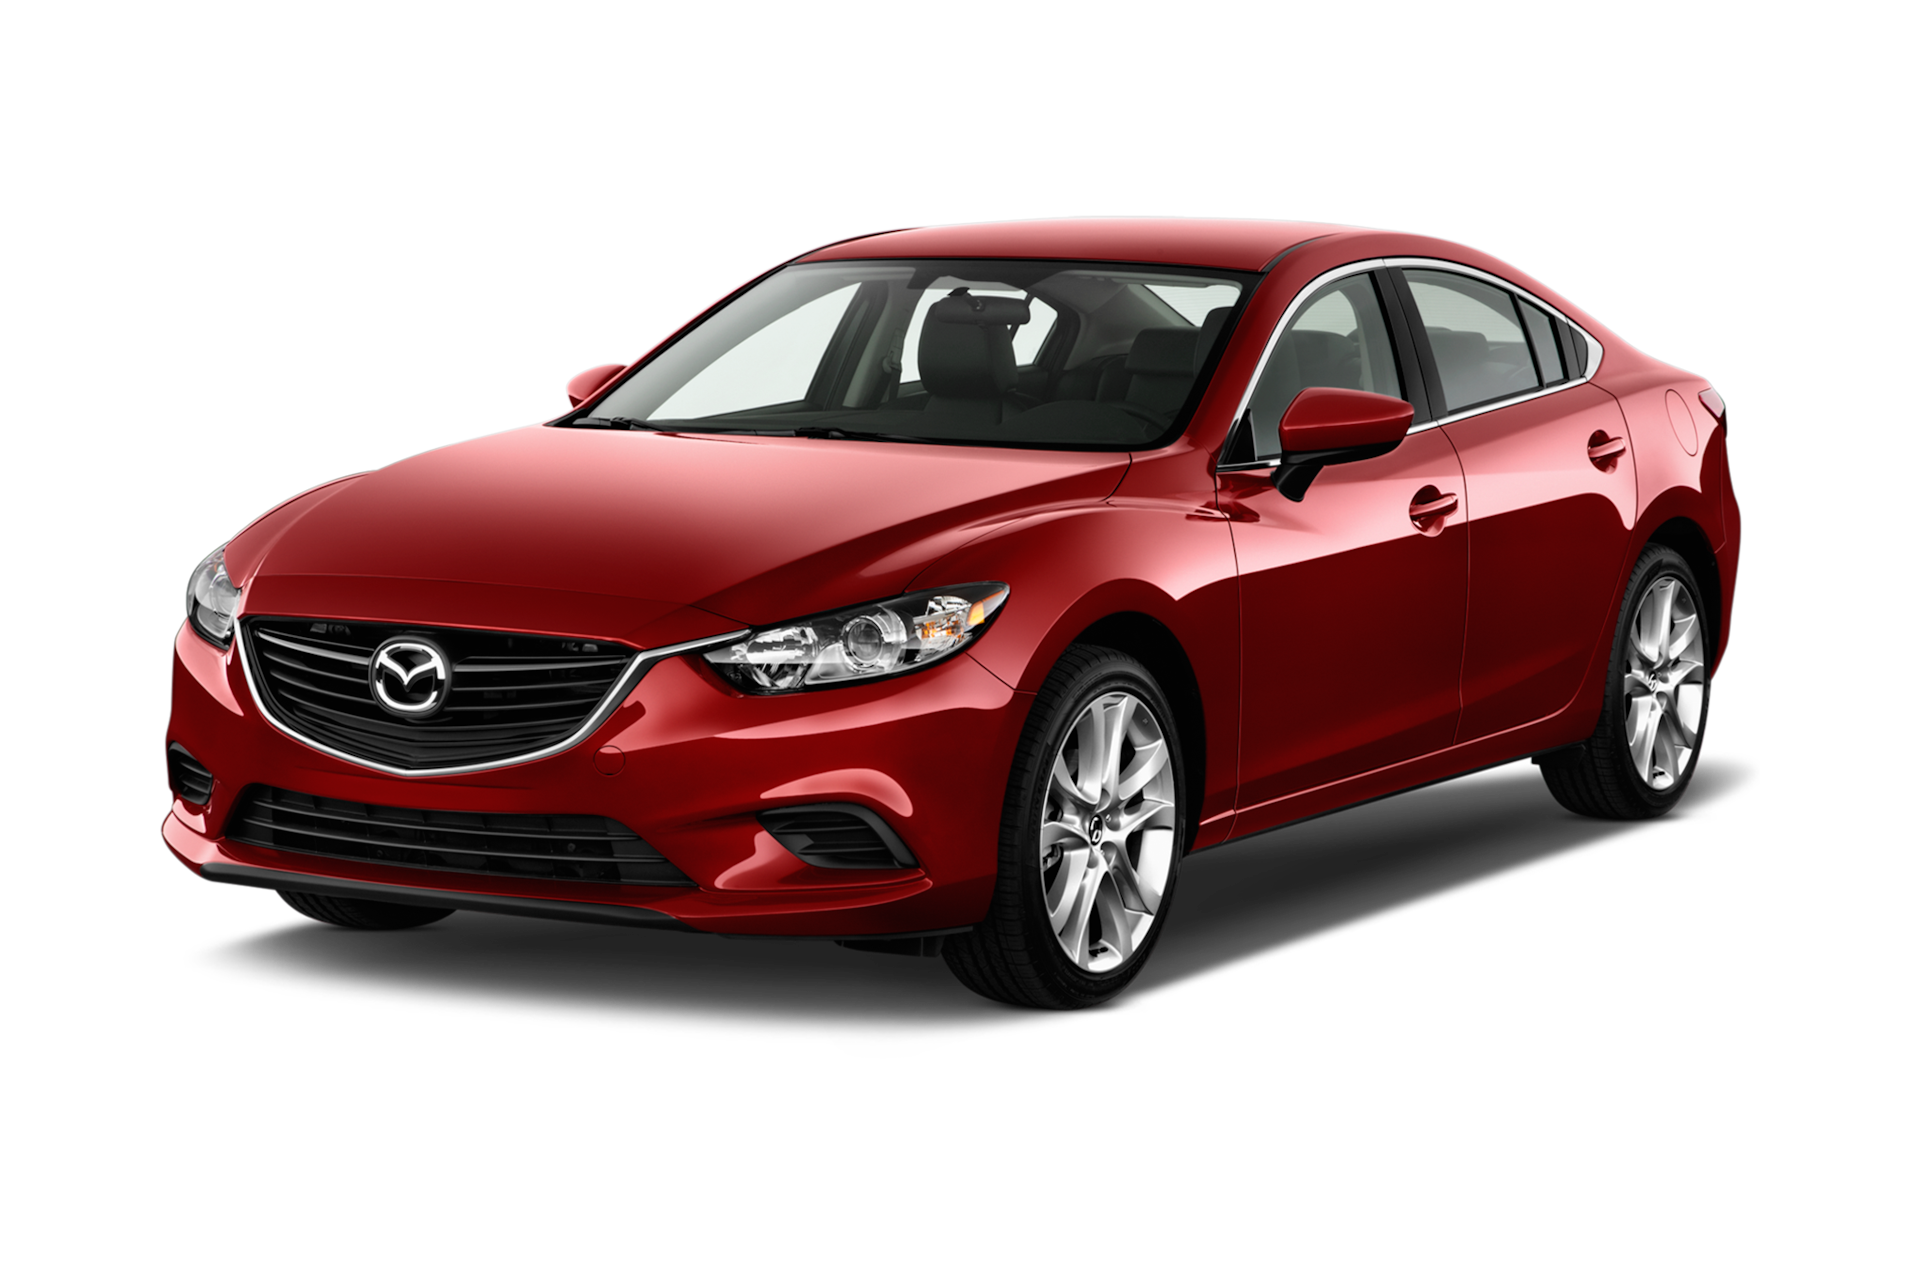 2014 Mazda Mazda6 Prices, Reviews, and Photos - MotorTrend